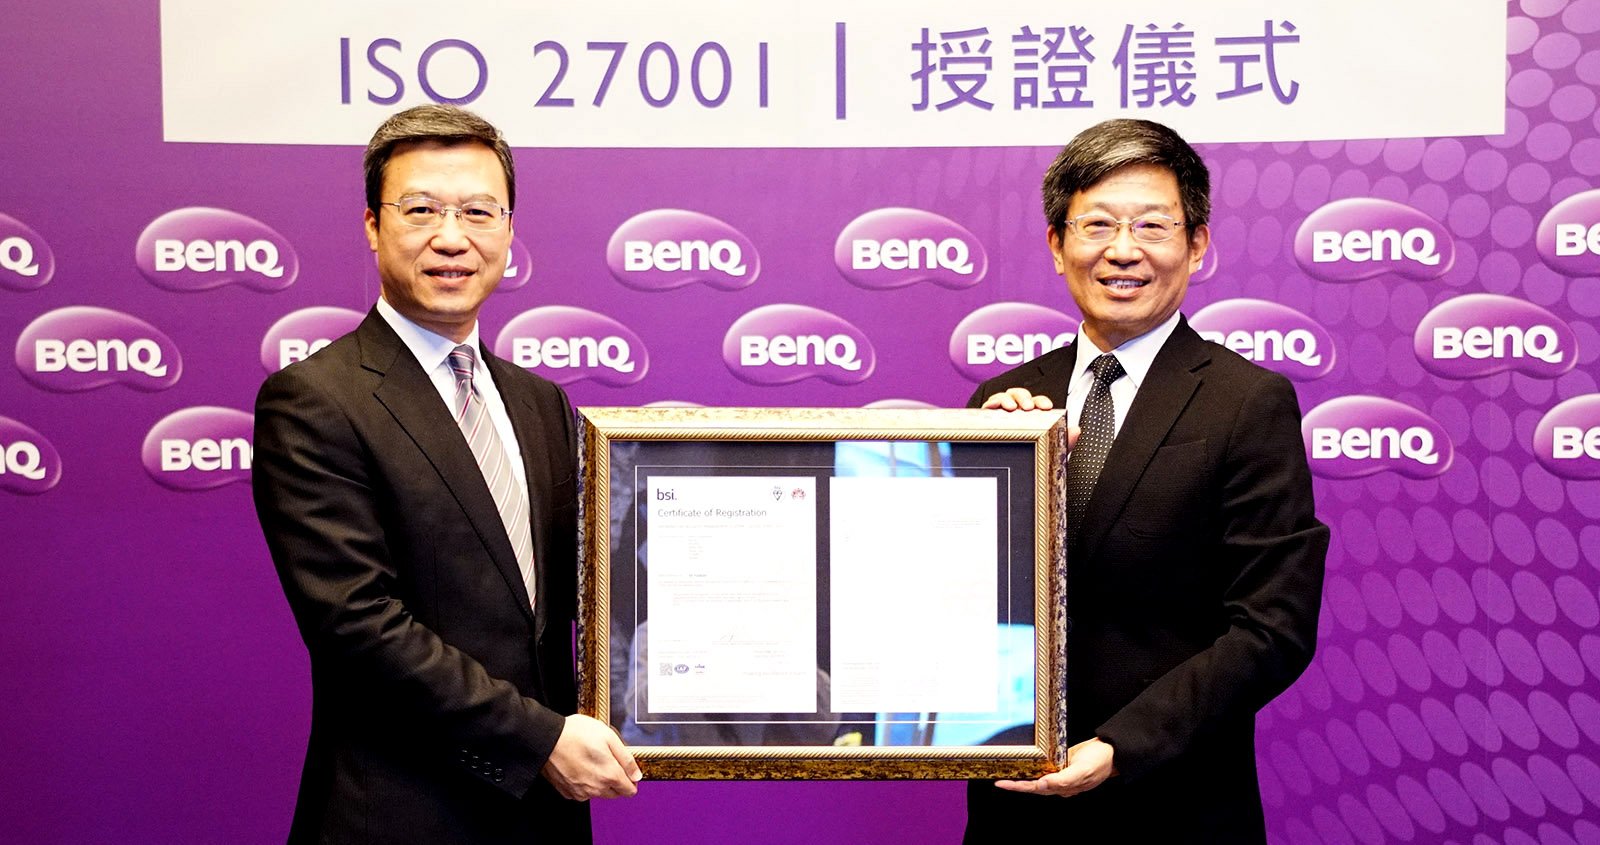 benq-information-security-with-iso27001-certification